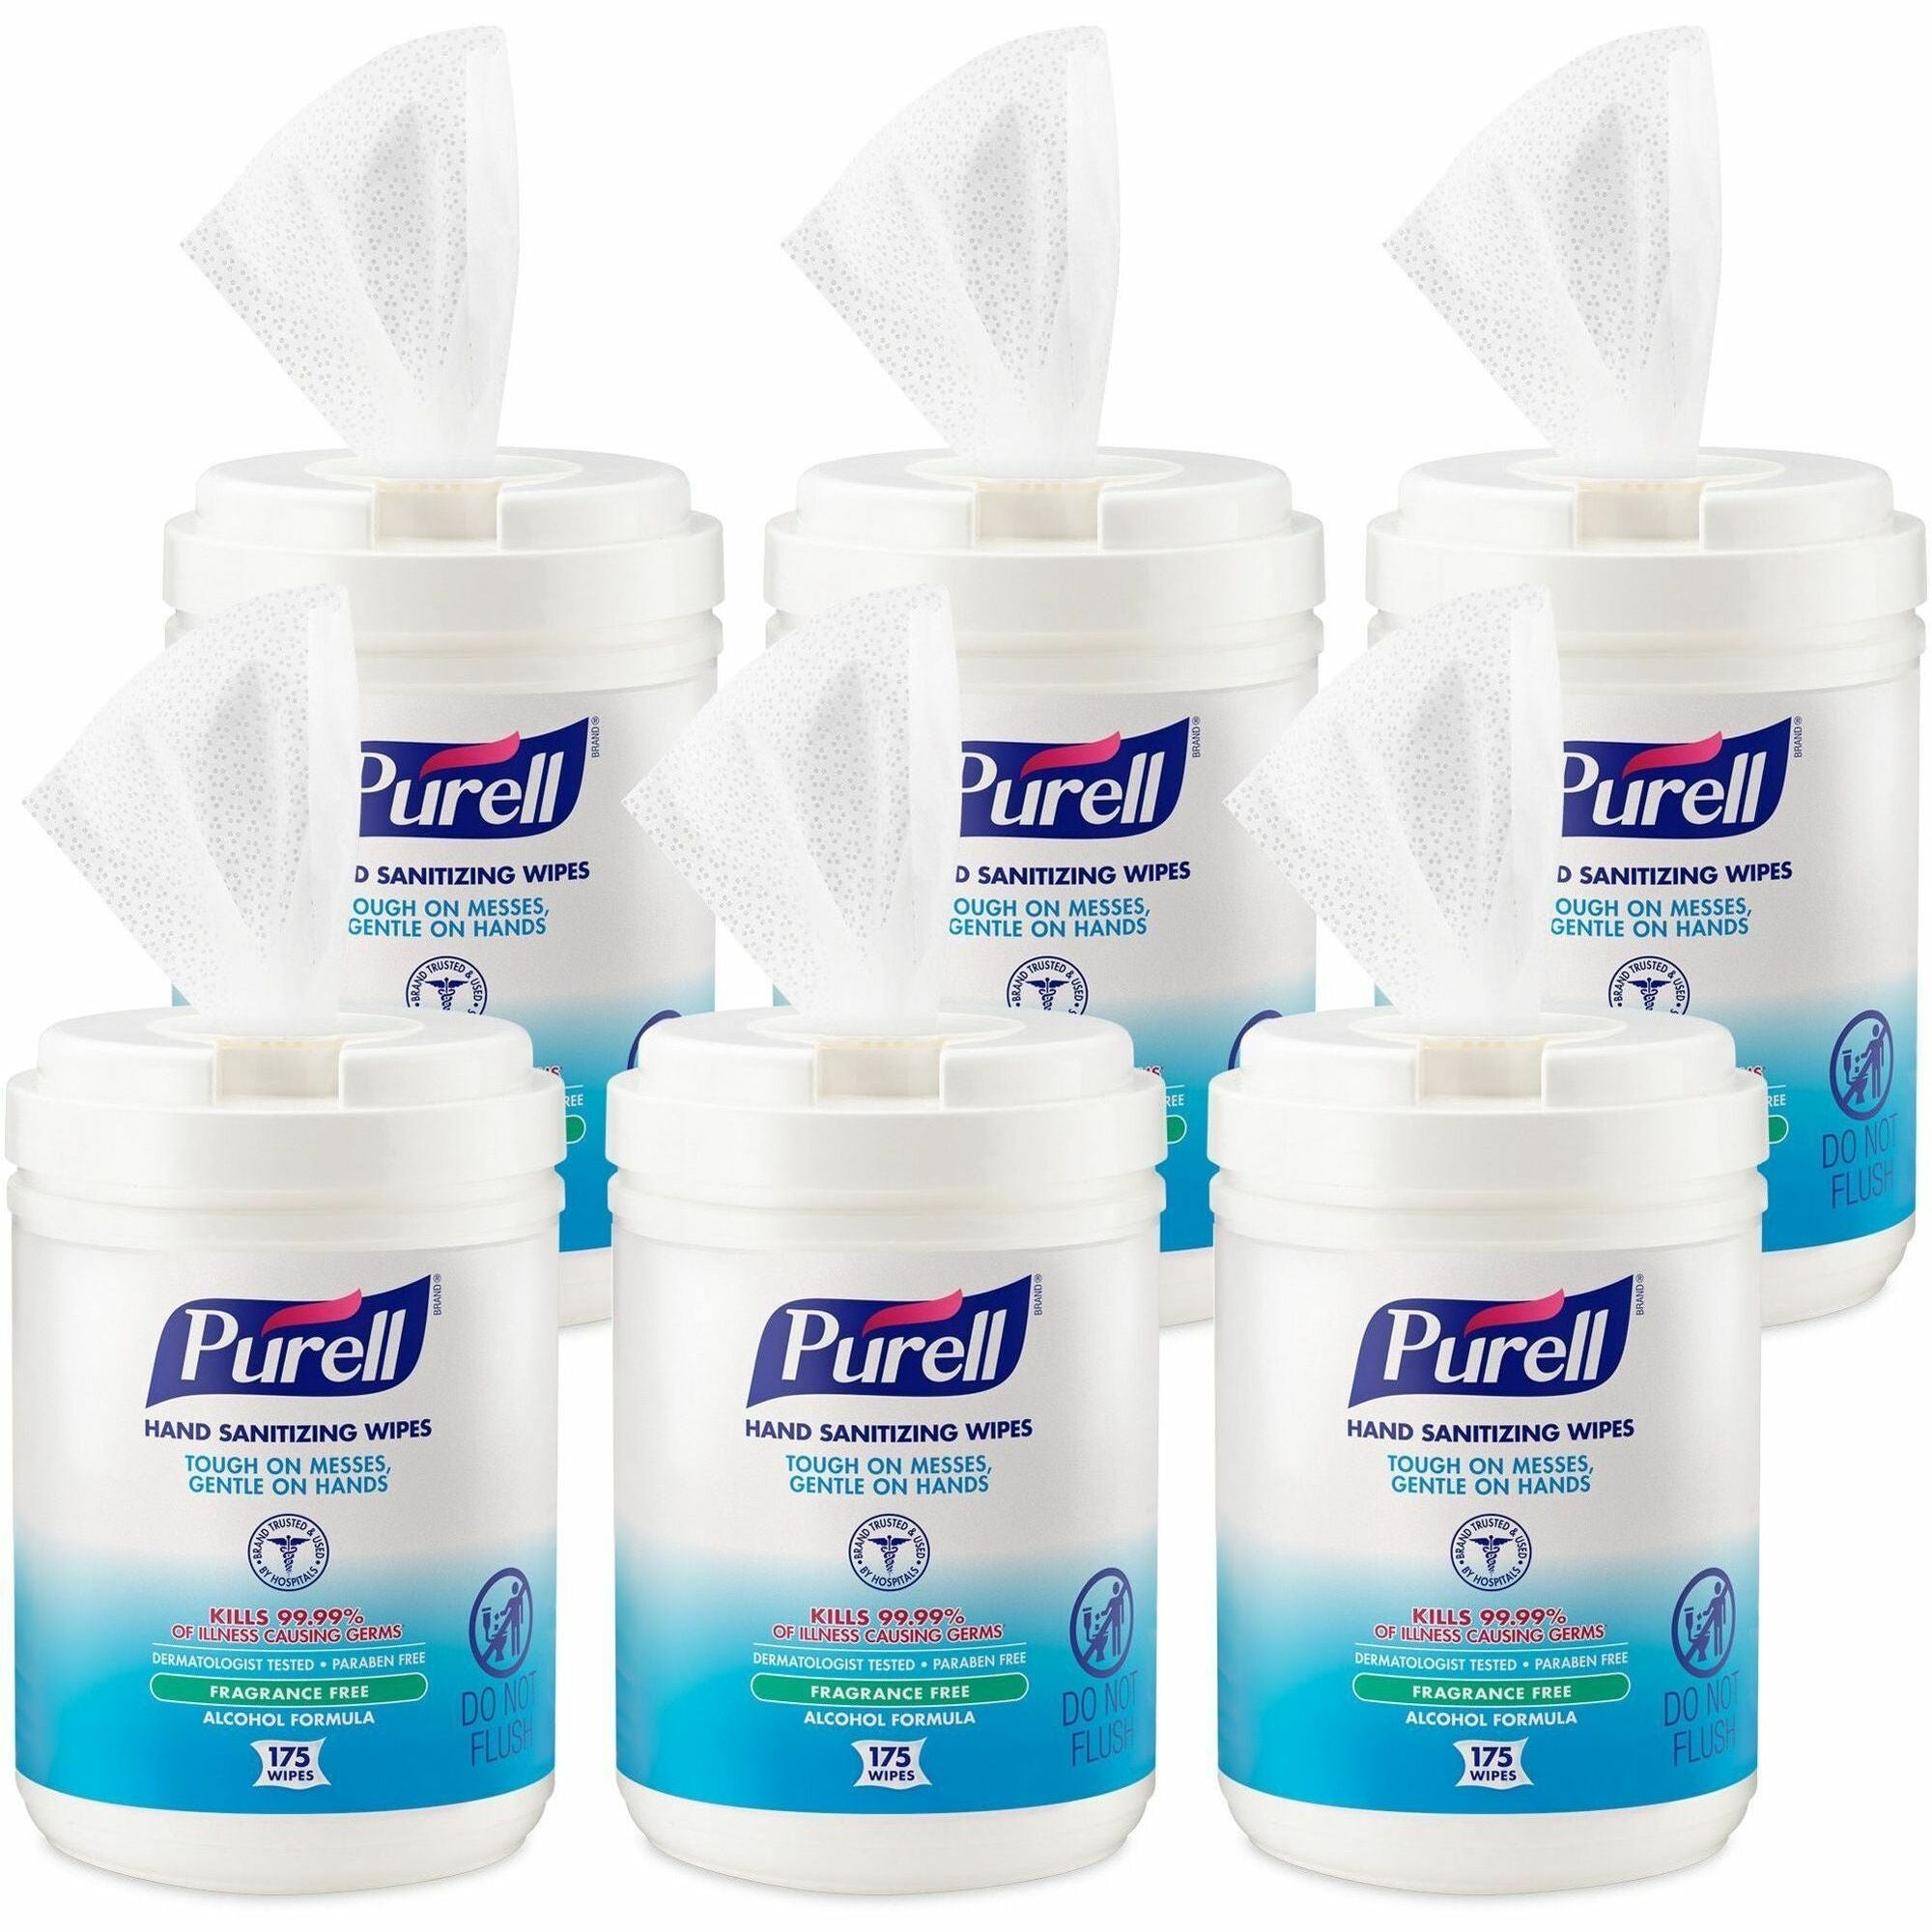 purell-alcohol-hand-sanitizing-wipes-6-x-7-white-residue-free-dye-free-fragrance-free-non-sticky-non-irritating-non-irritating-hypoallergenic-durable-pre-moistened-lint-free-textured-for-hand-175-per-canister-6-carton_goj903106ct - 1